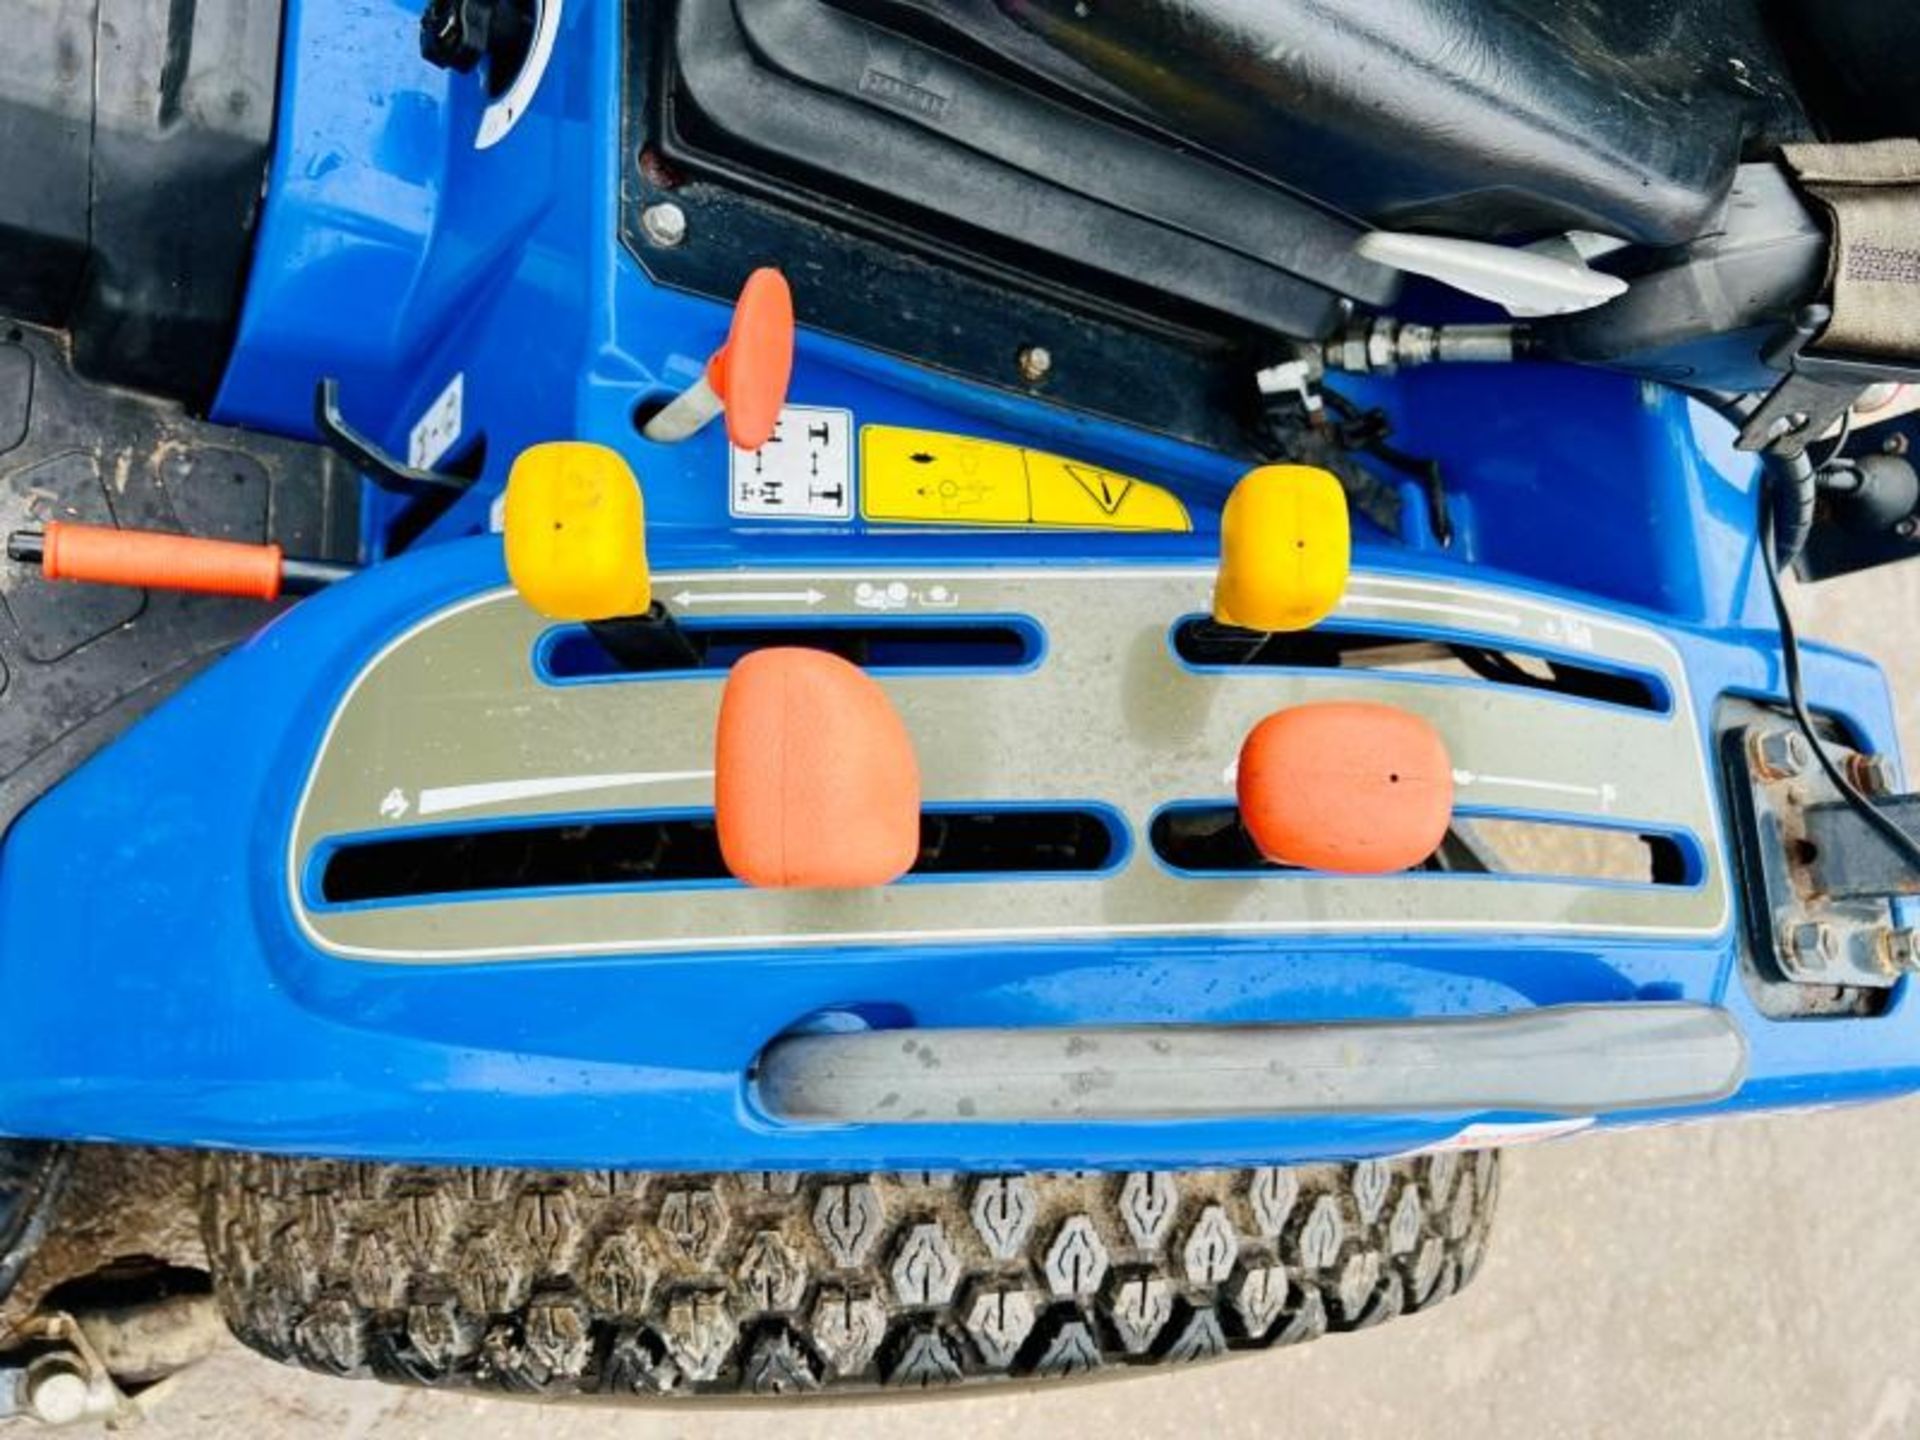 ISEKI TM3265 4WD COMPACT TRACTOR *446 HOURS* C/W MOWER DECK & ROLE BAR - Image 5 of 12